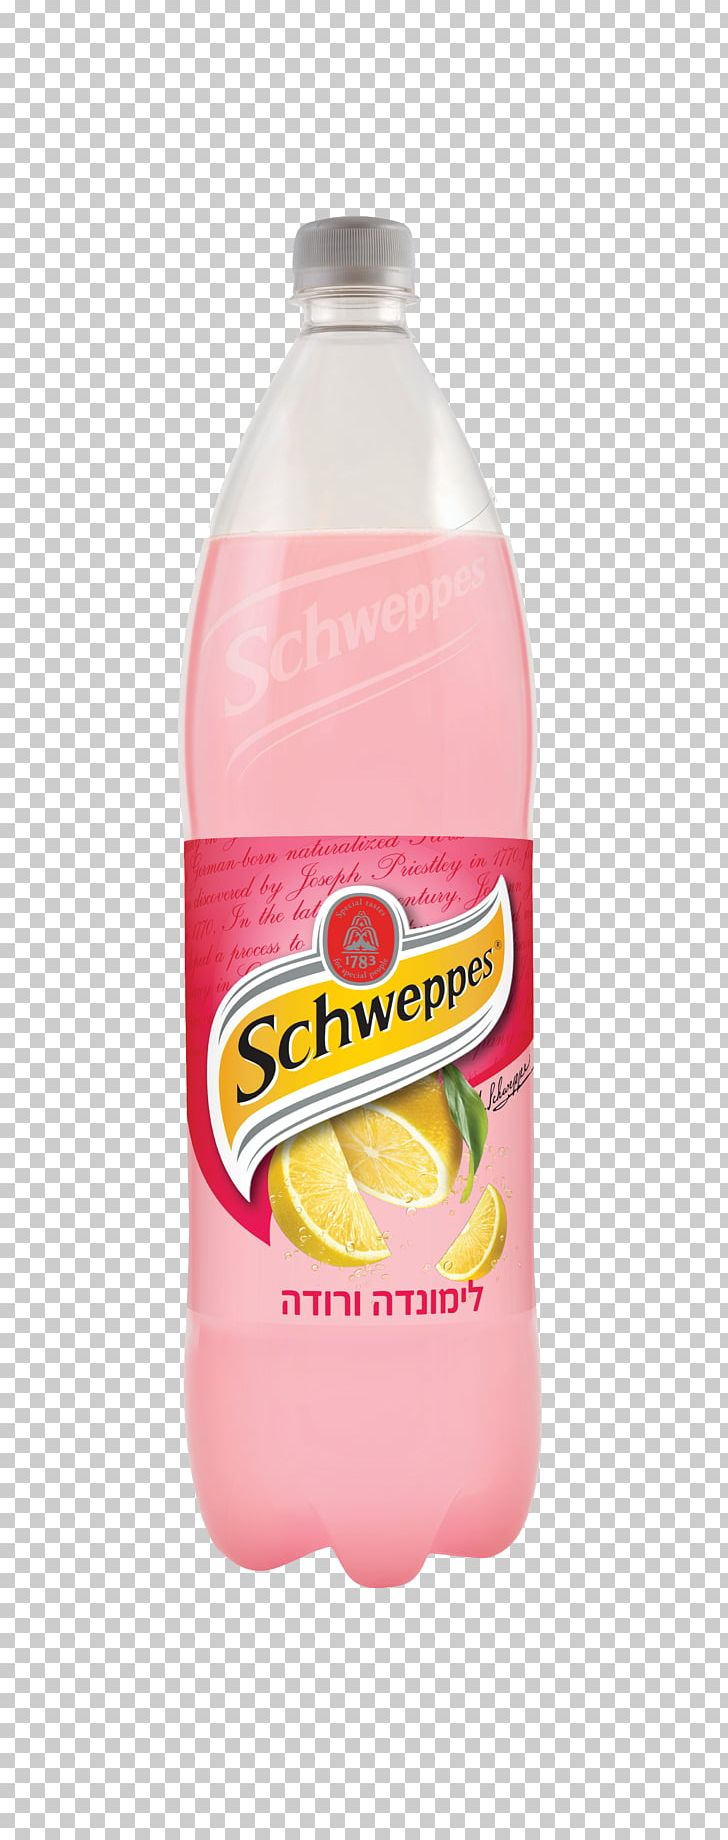 Fizzy Drinks Schweppes Enhanced Water Orange Soft Drink יפאורה-תבורי PNG, Clipart, Bottle, Celebrity, Drink, Enhanced Water, Fizzy Drinks Free PNG Download